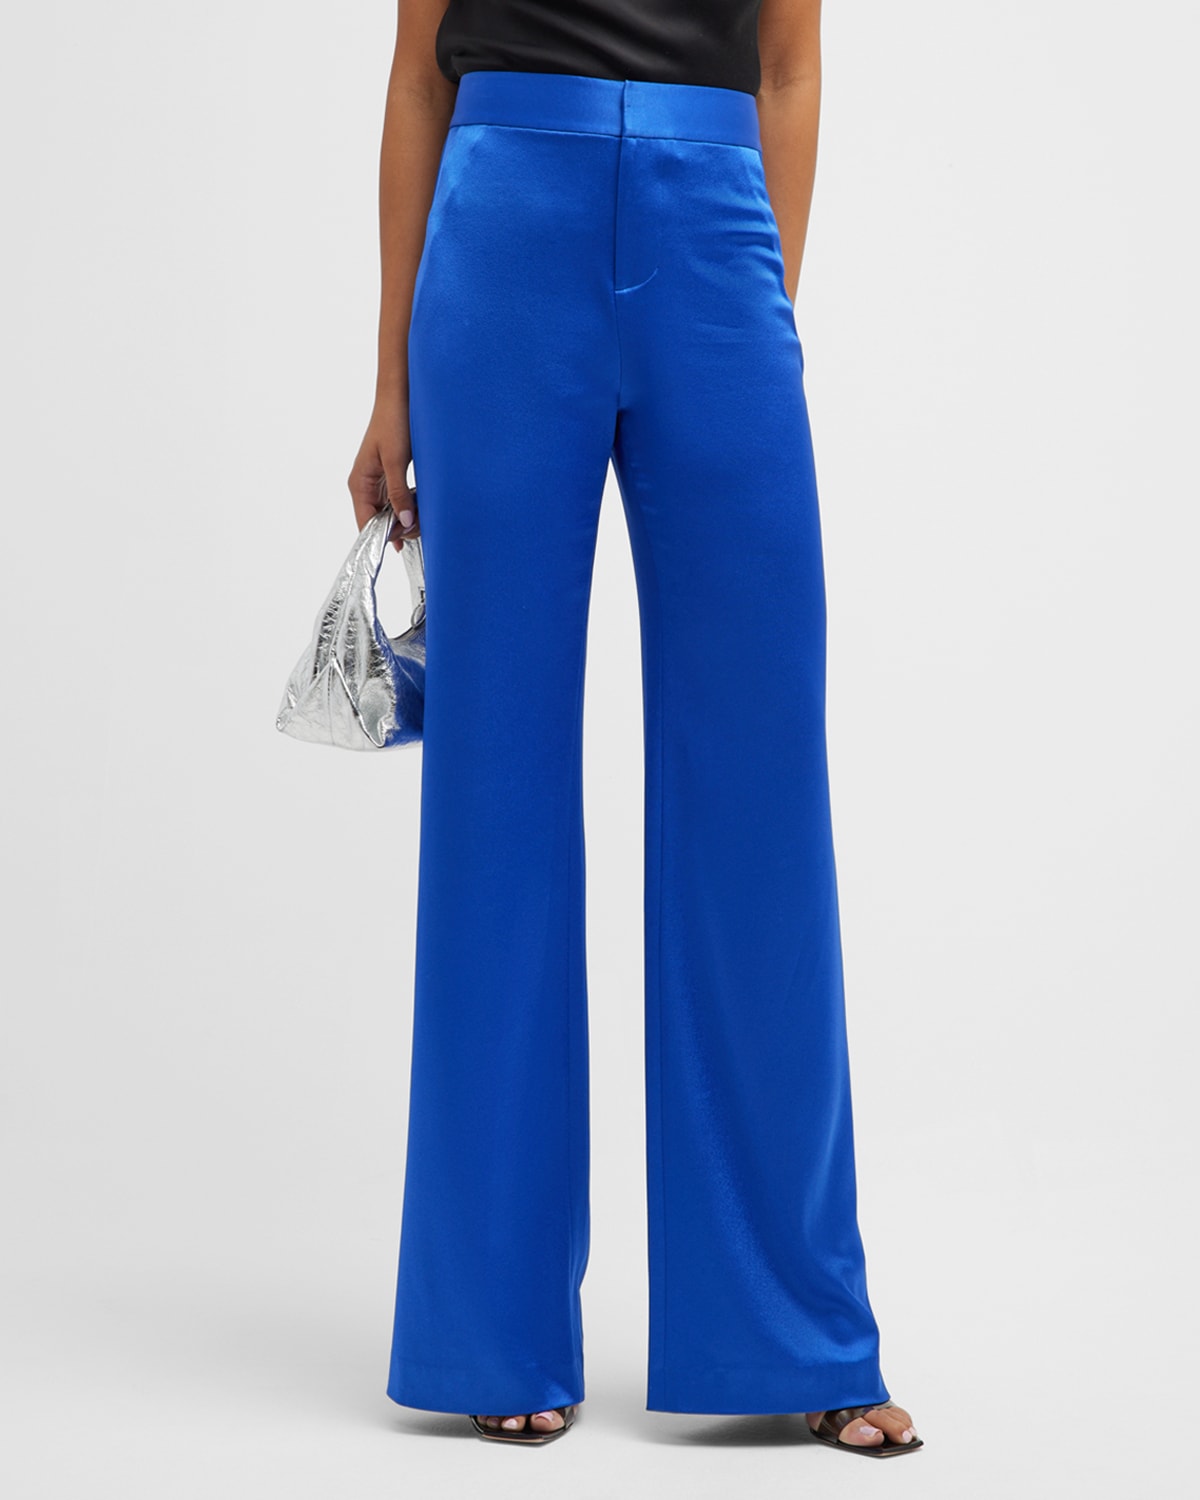 Alice + Olivia Teeny Satin Fit-and-Flare Bootcut Pants | Neiman Marcus